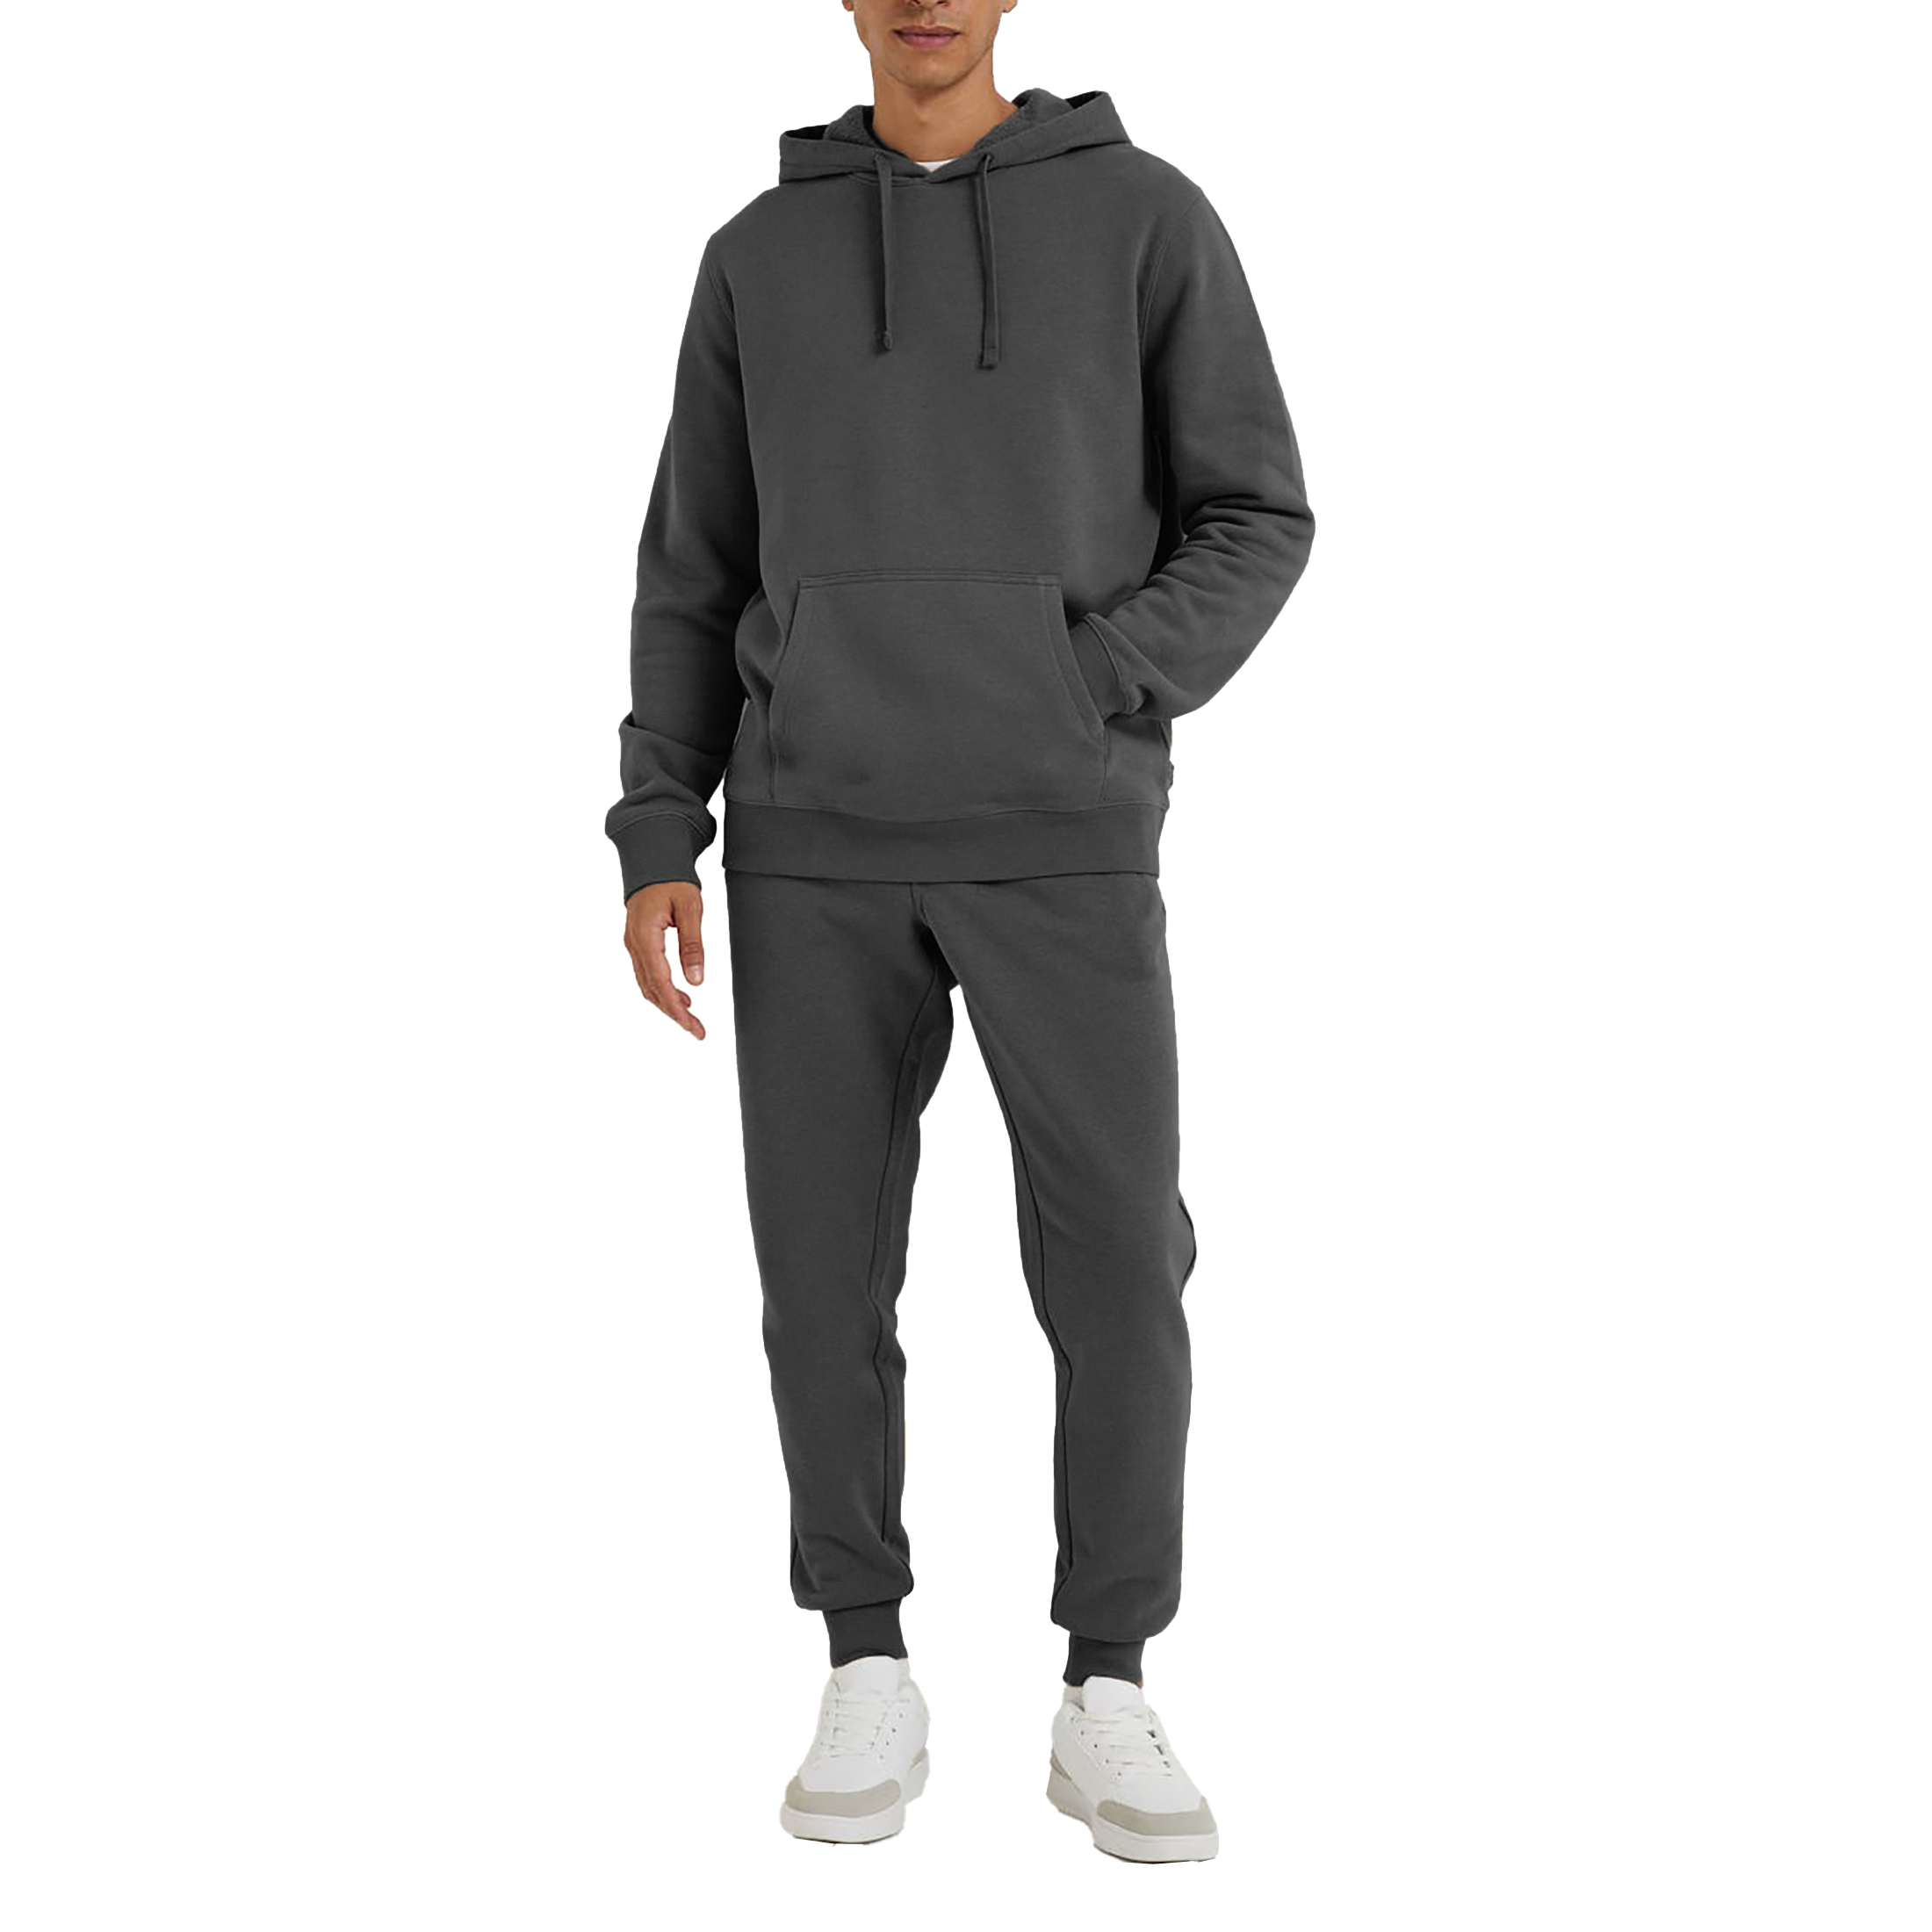 Men's Athletic Warm Jogging Pullover Active Tracksuit - Charcoal, 4X-Large